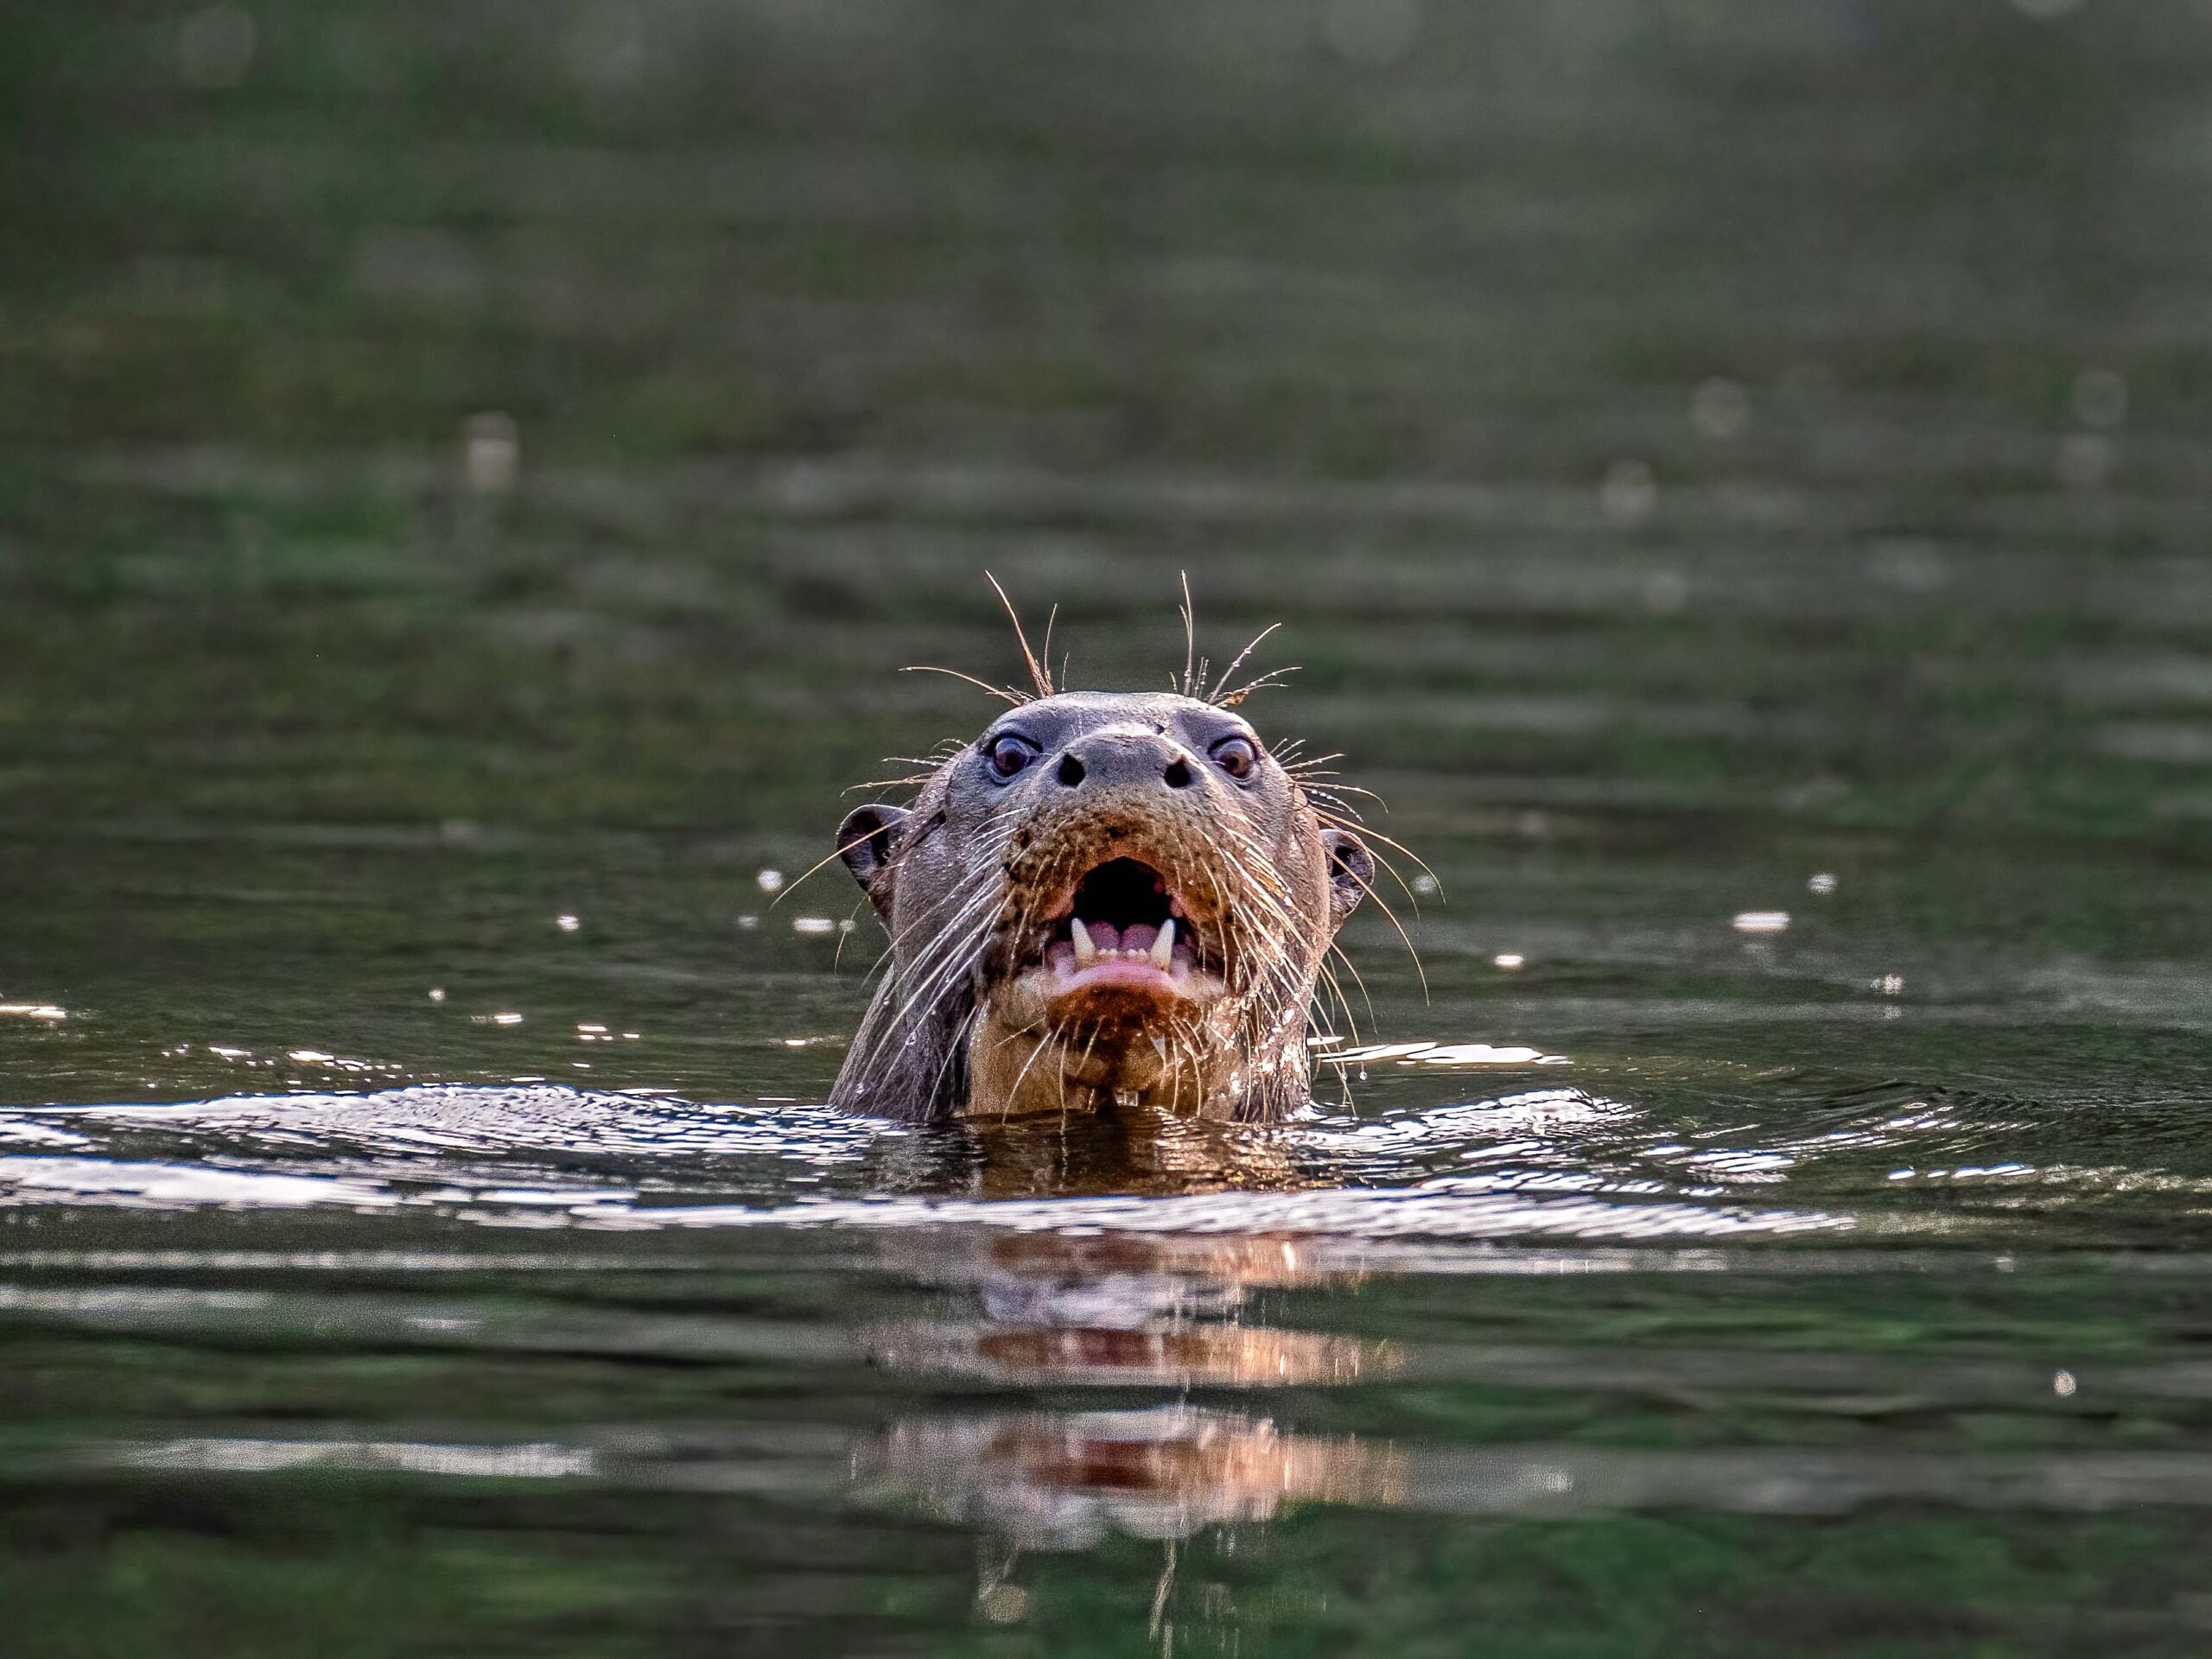 Giant RIver otter in Tambopata National Reserve